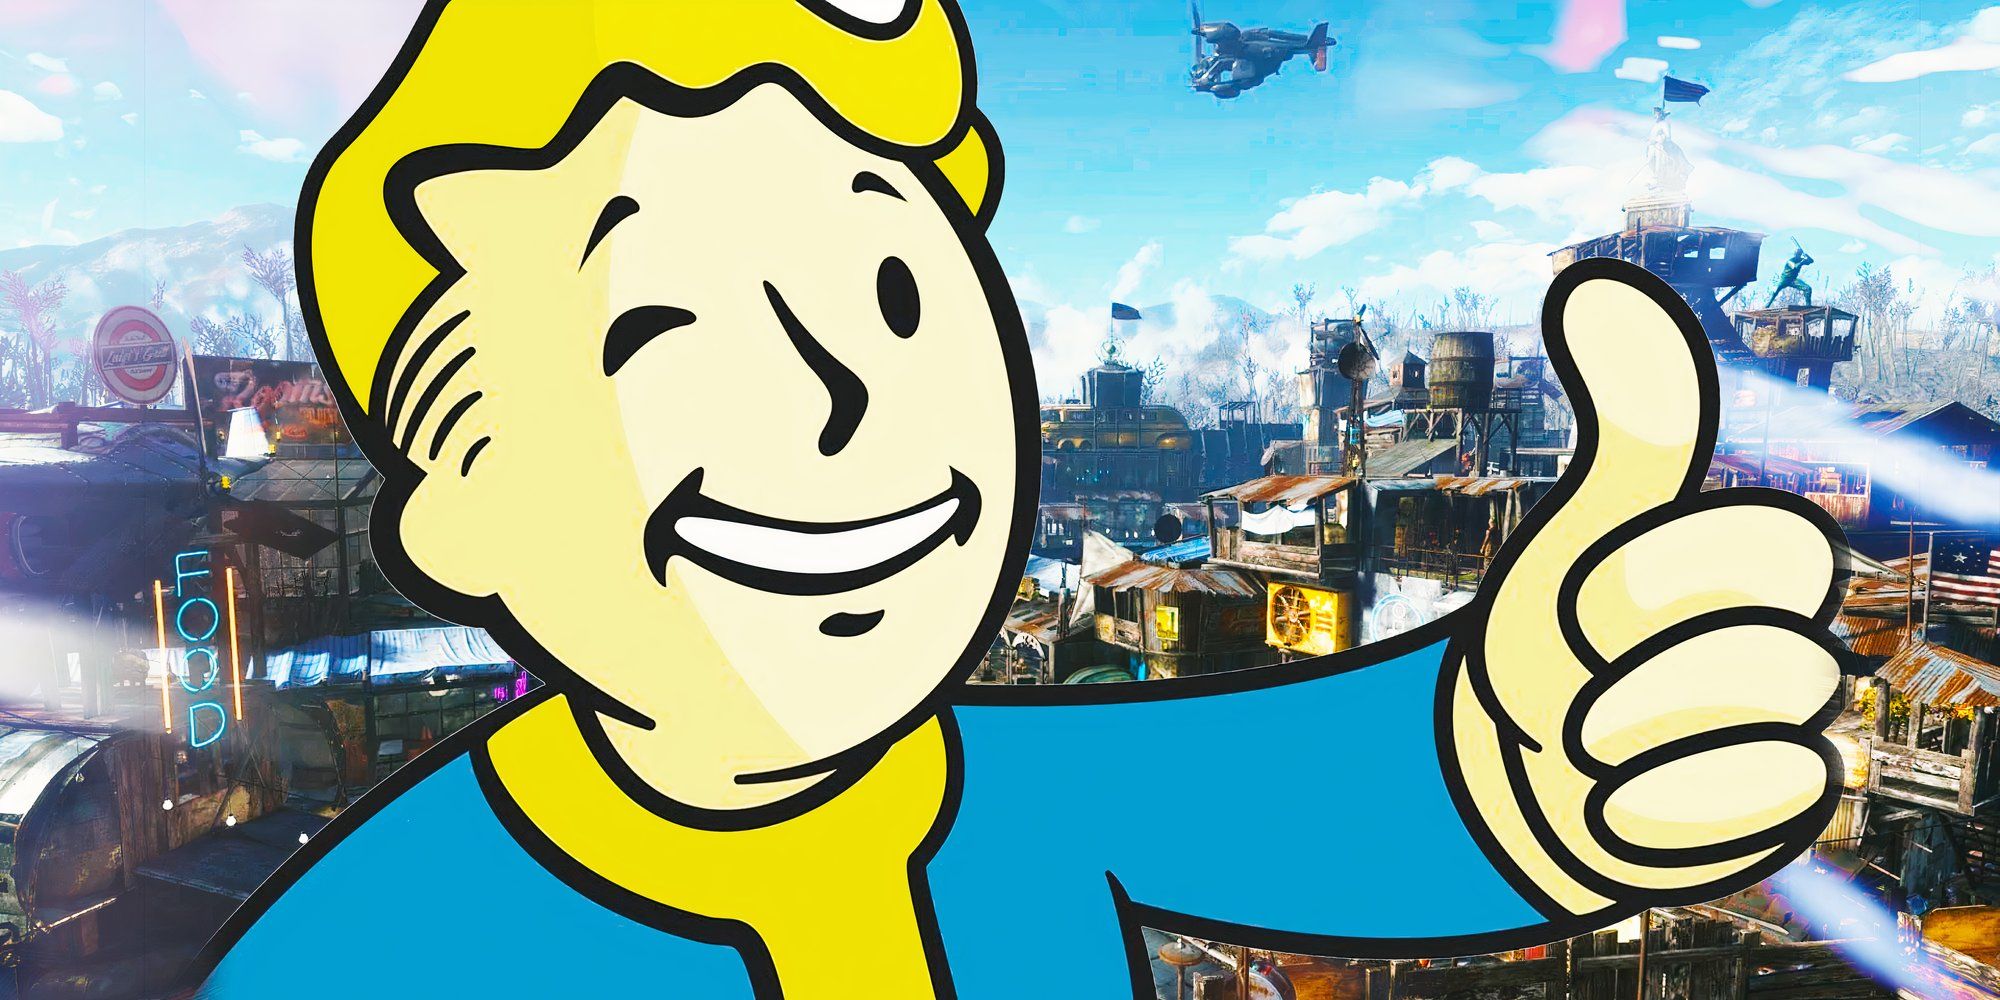 Vault boy from Fallout 4 with a settlement in the background